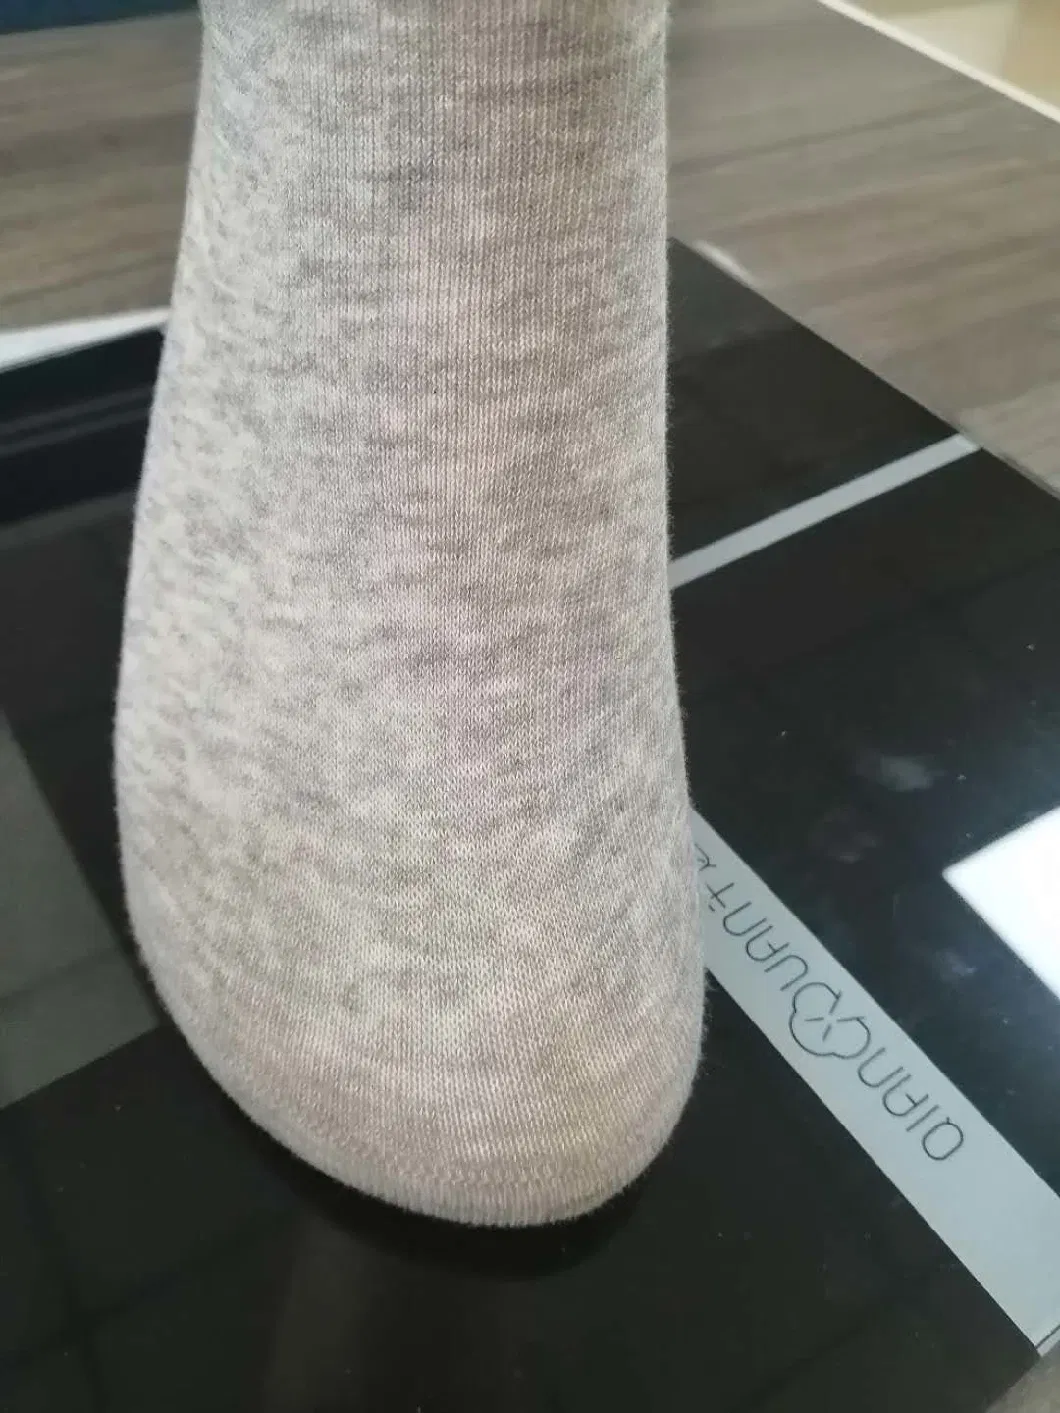 Completed Automatic Toe Closing Socks Machine with Sewing